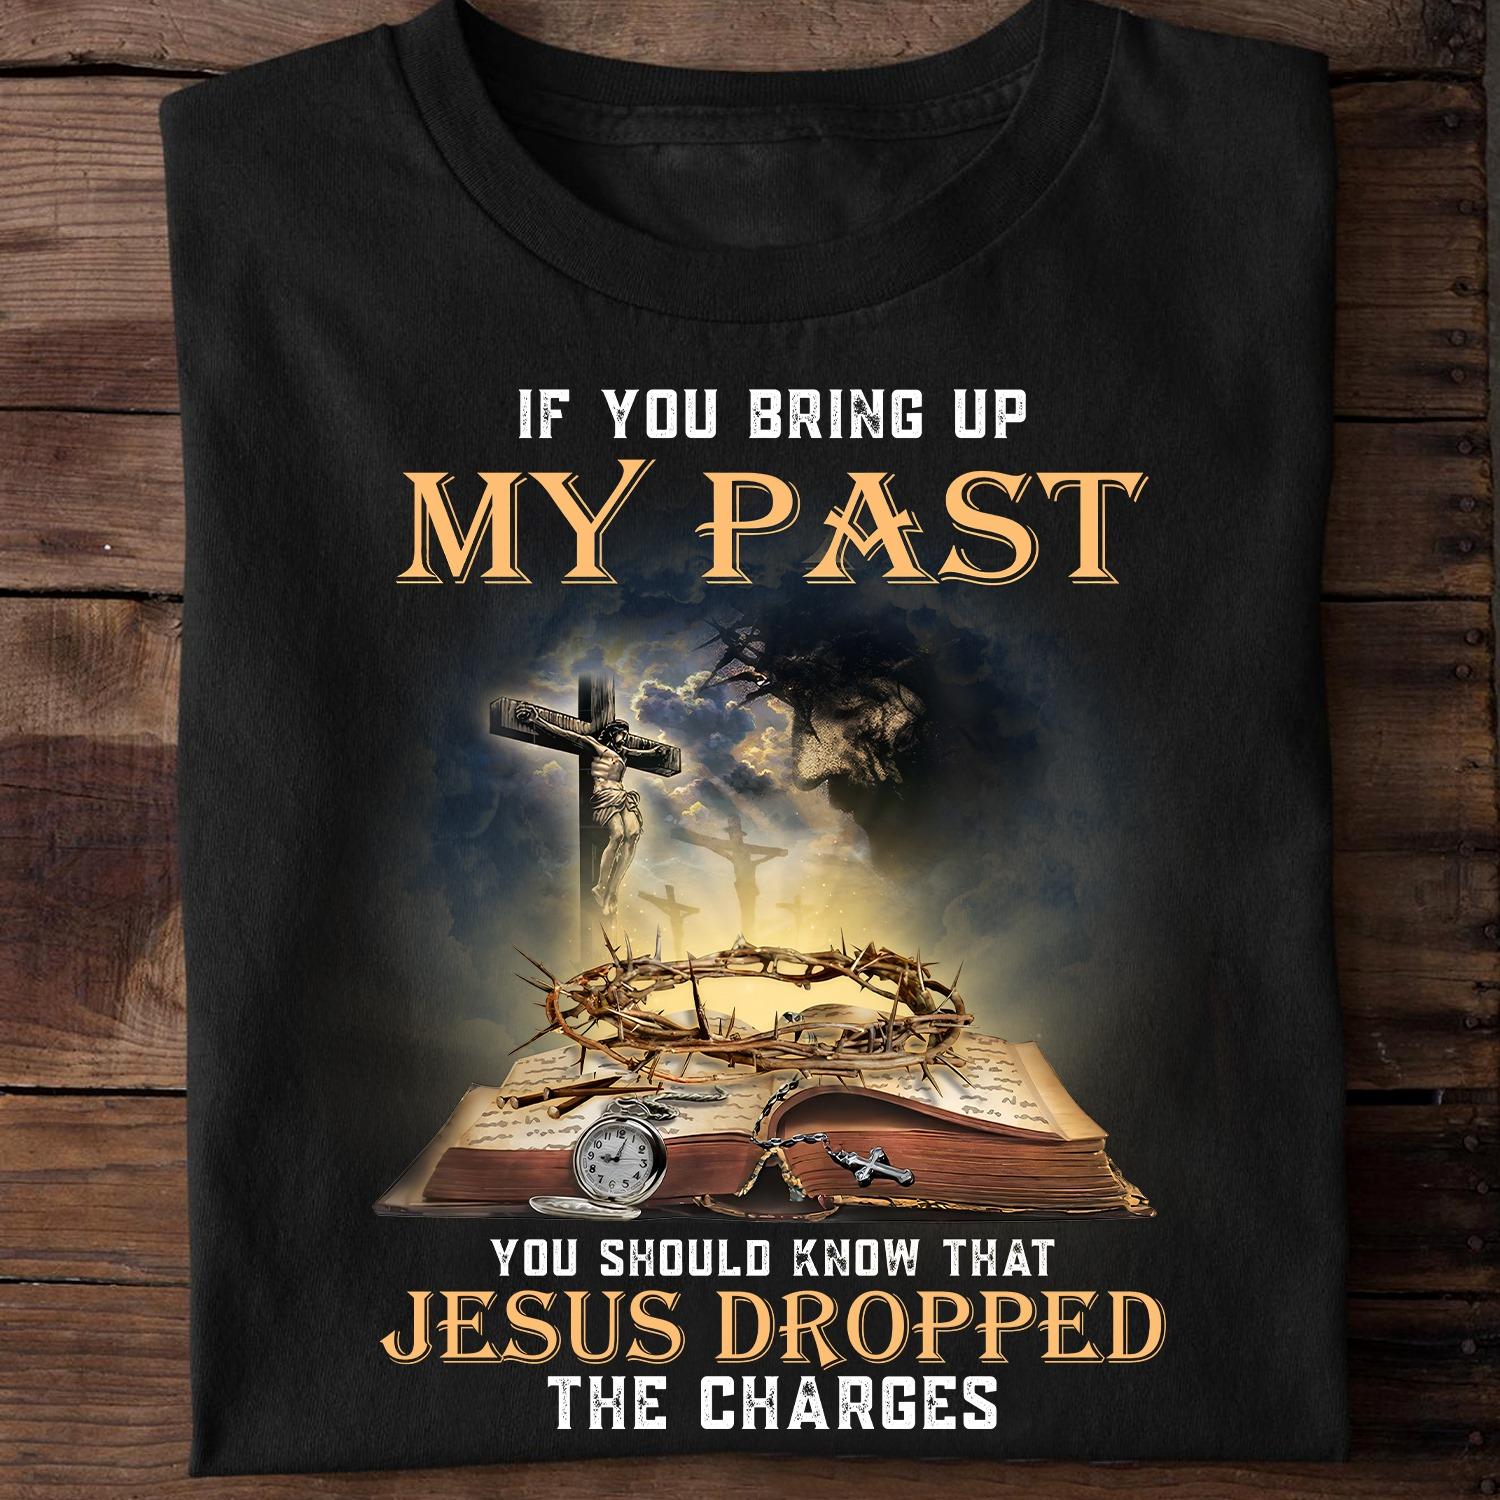 If you bring up my past you should know that Jesus dropped the charges - Jesus holy bible, Believe in Jesus